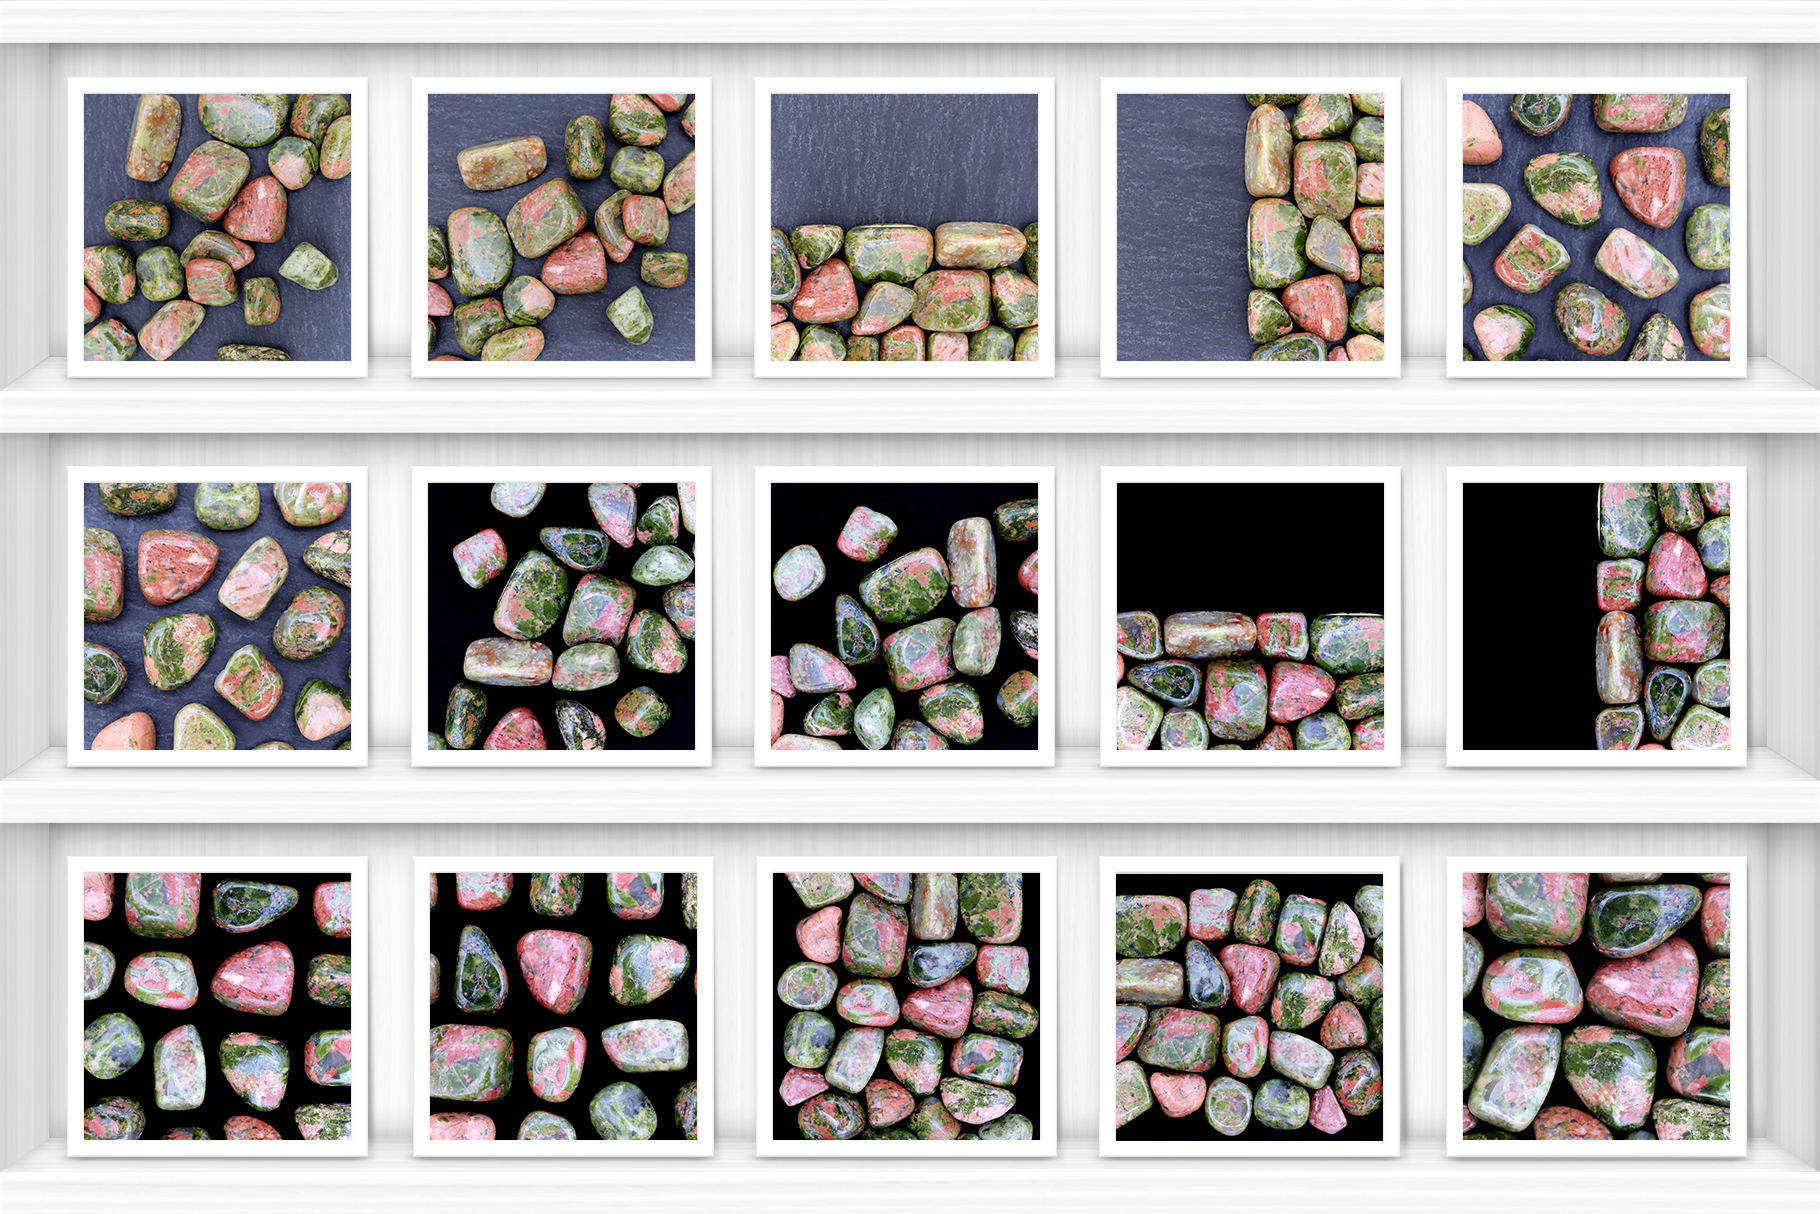 Unakite Background Textures Showcase Shelves Samples Preview